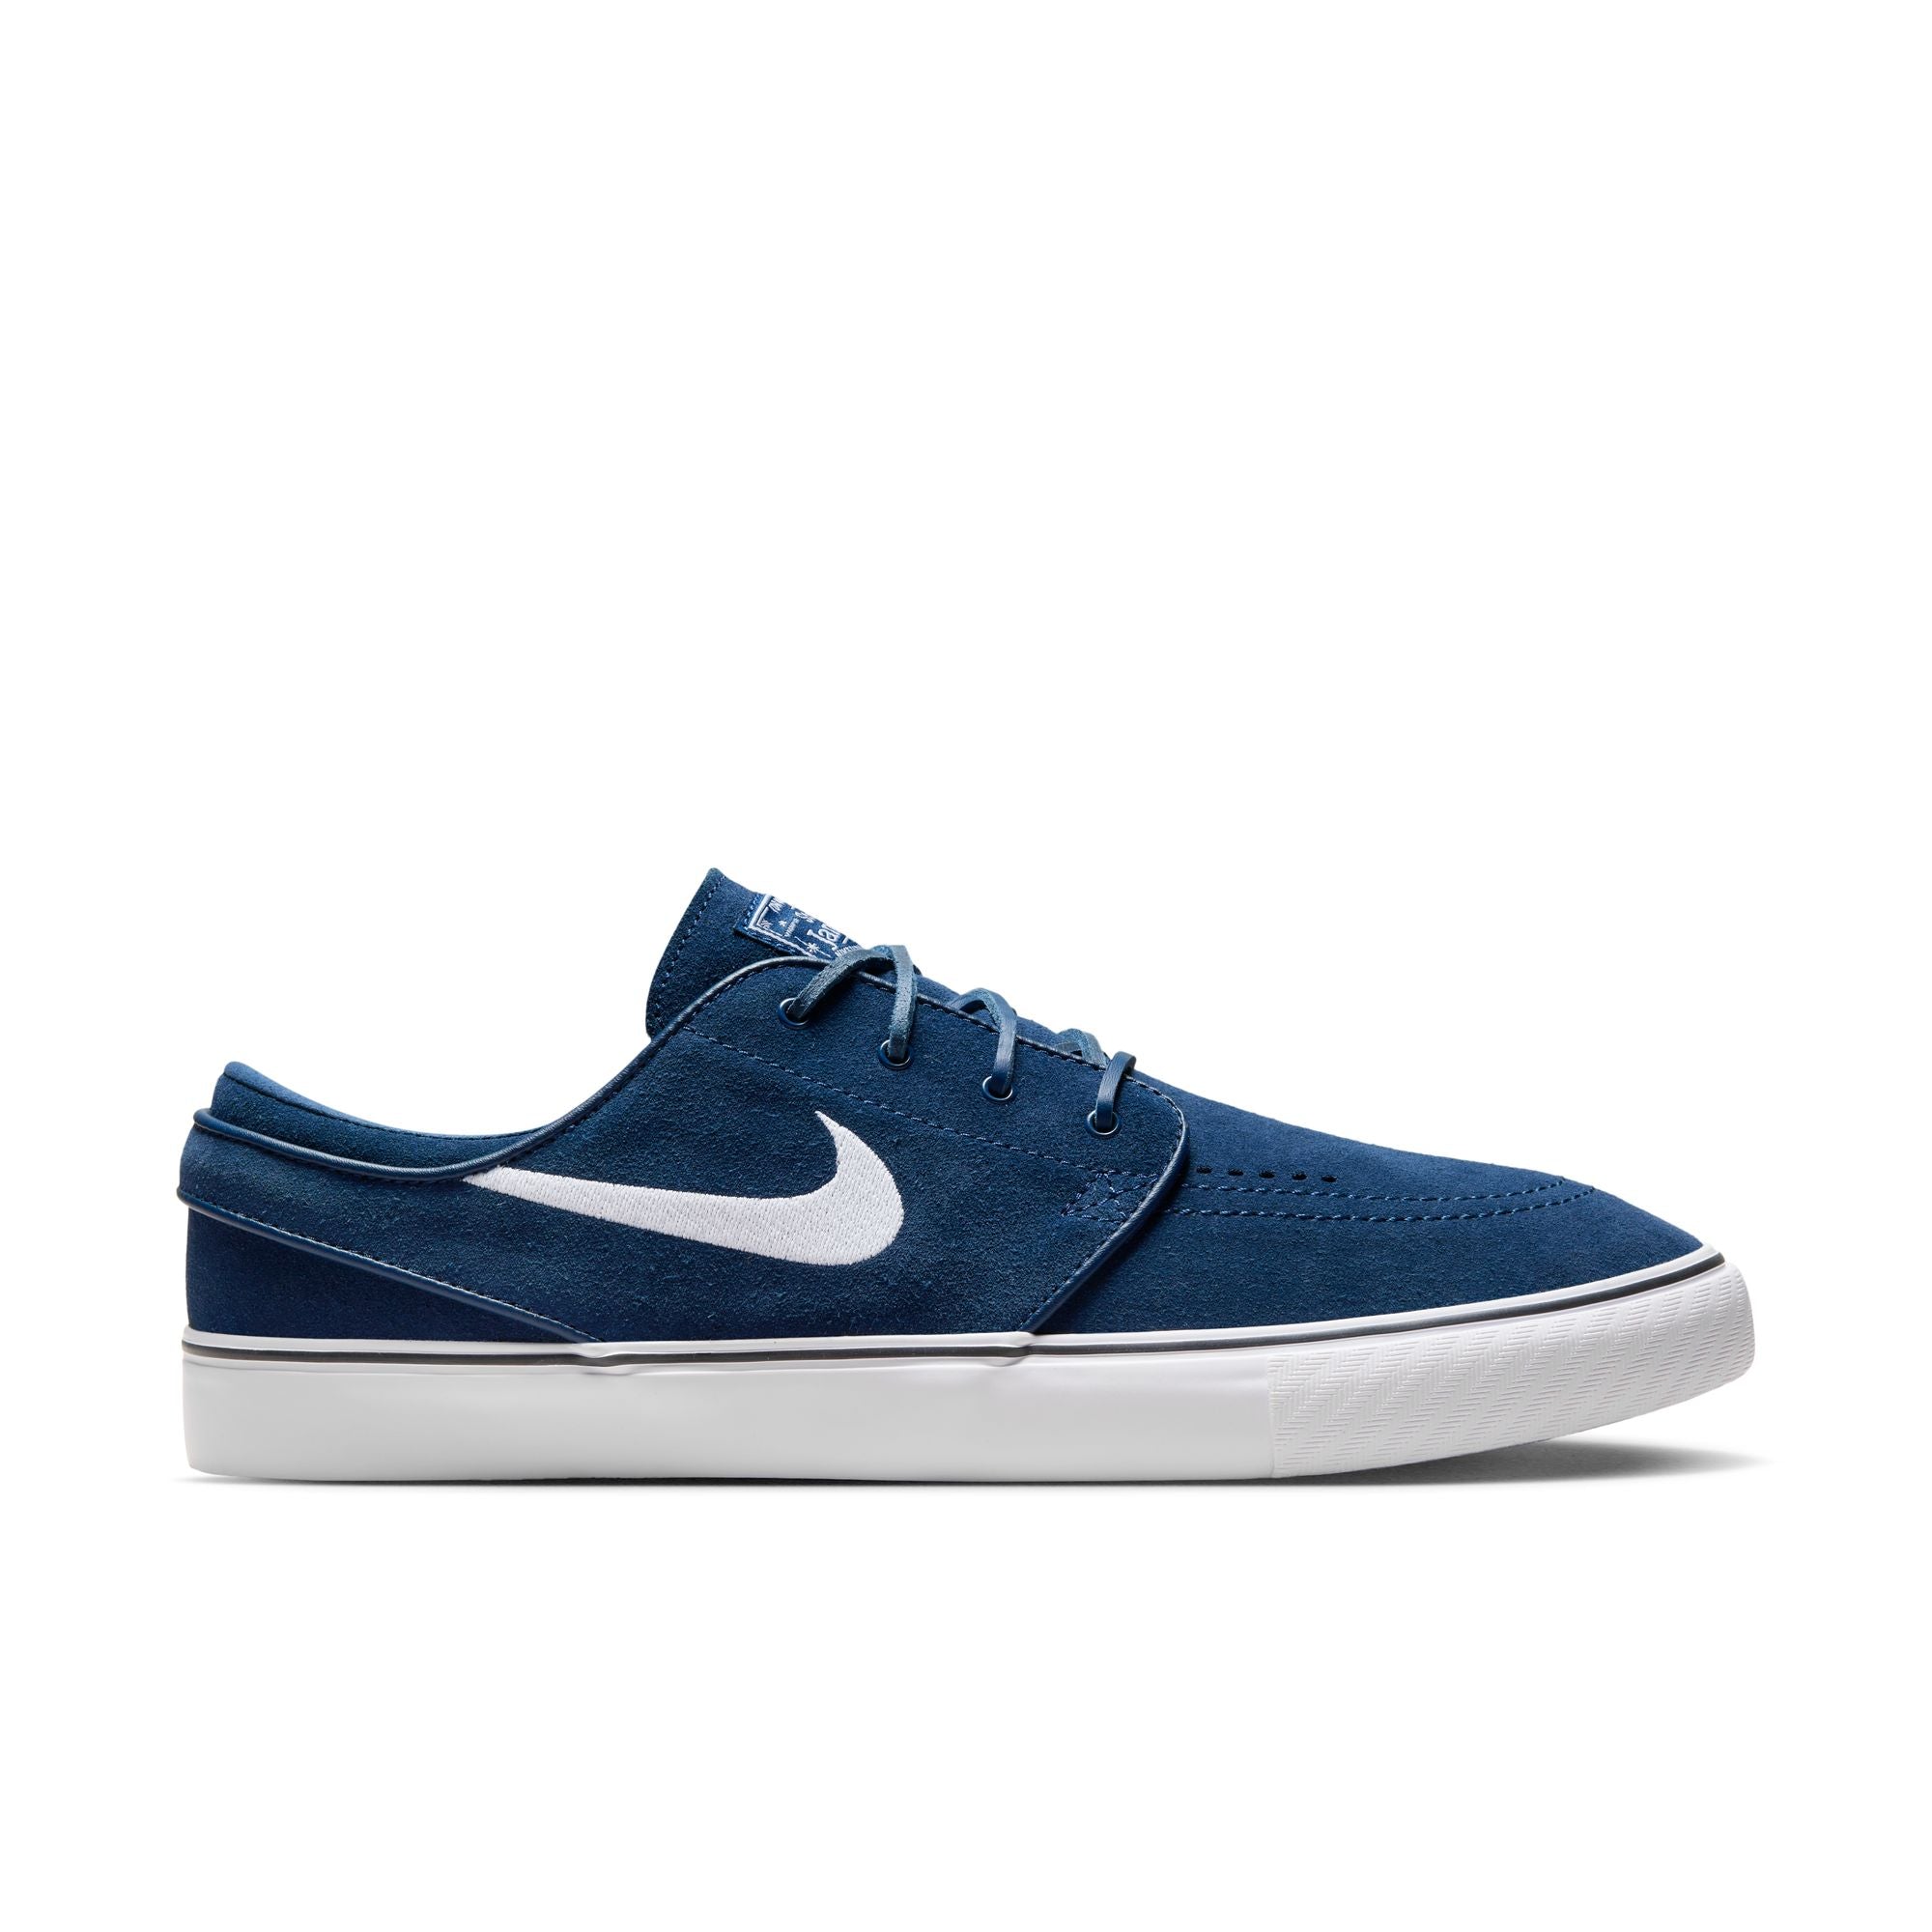 Dark blue nike low top skate shoes with a white nike swoosh logo and white sole. Free uk shipping over £50